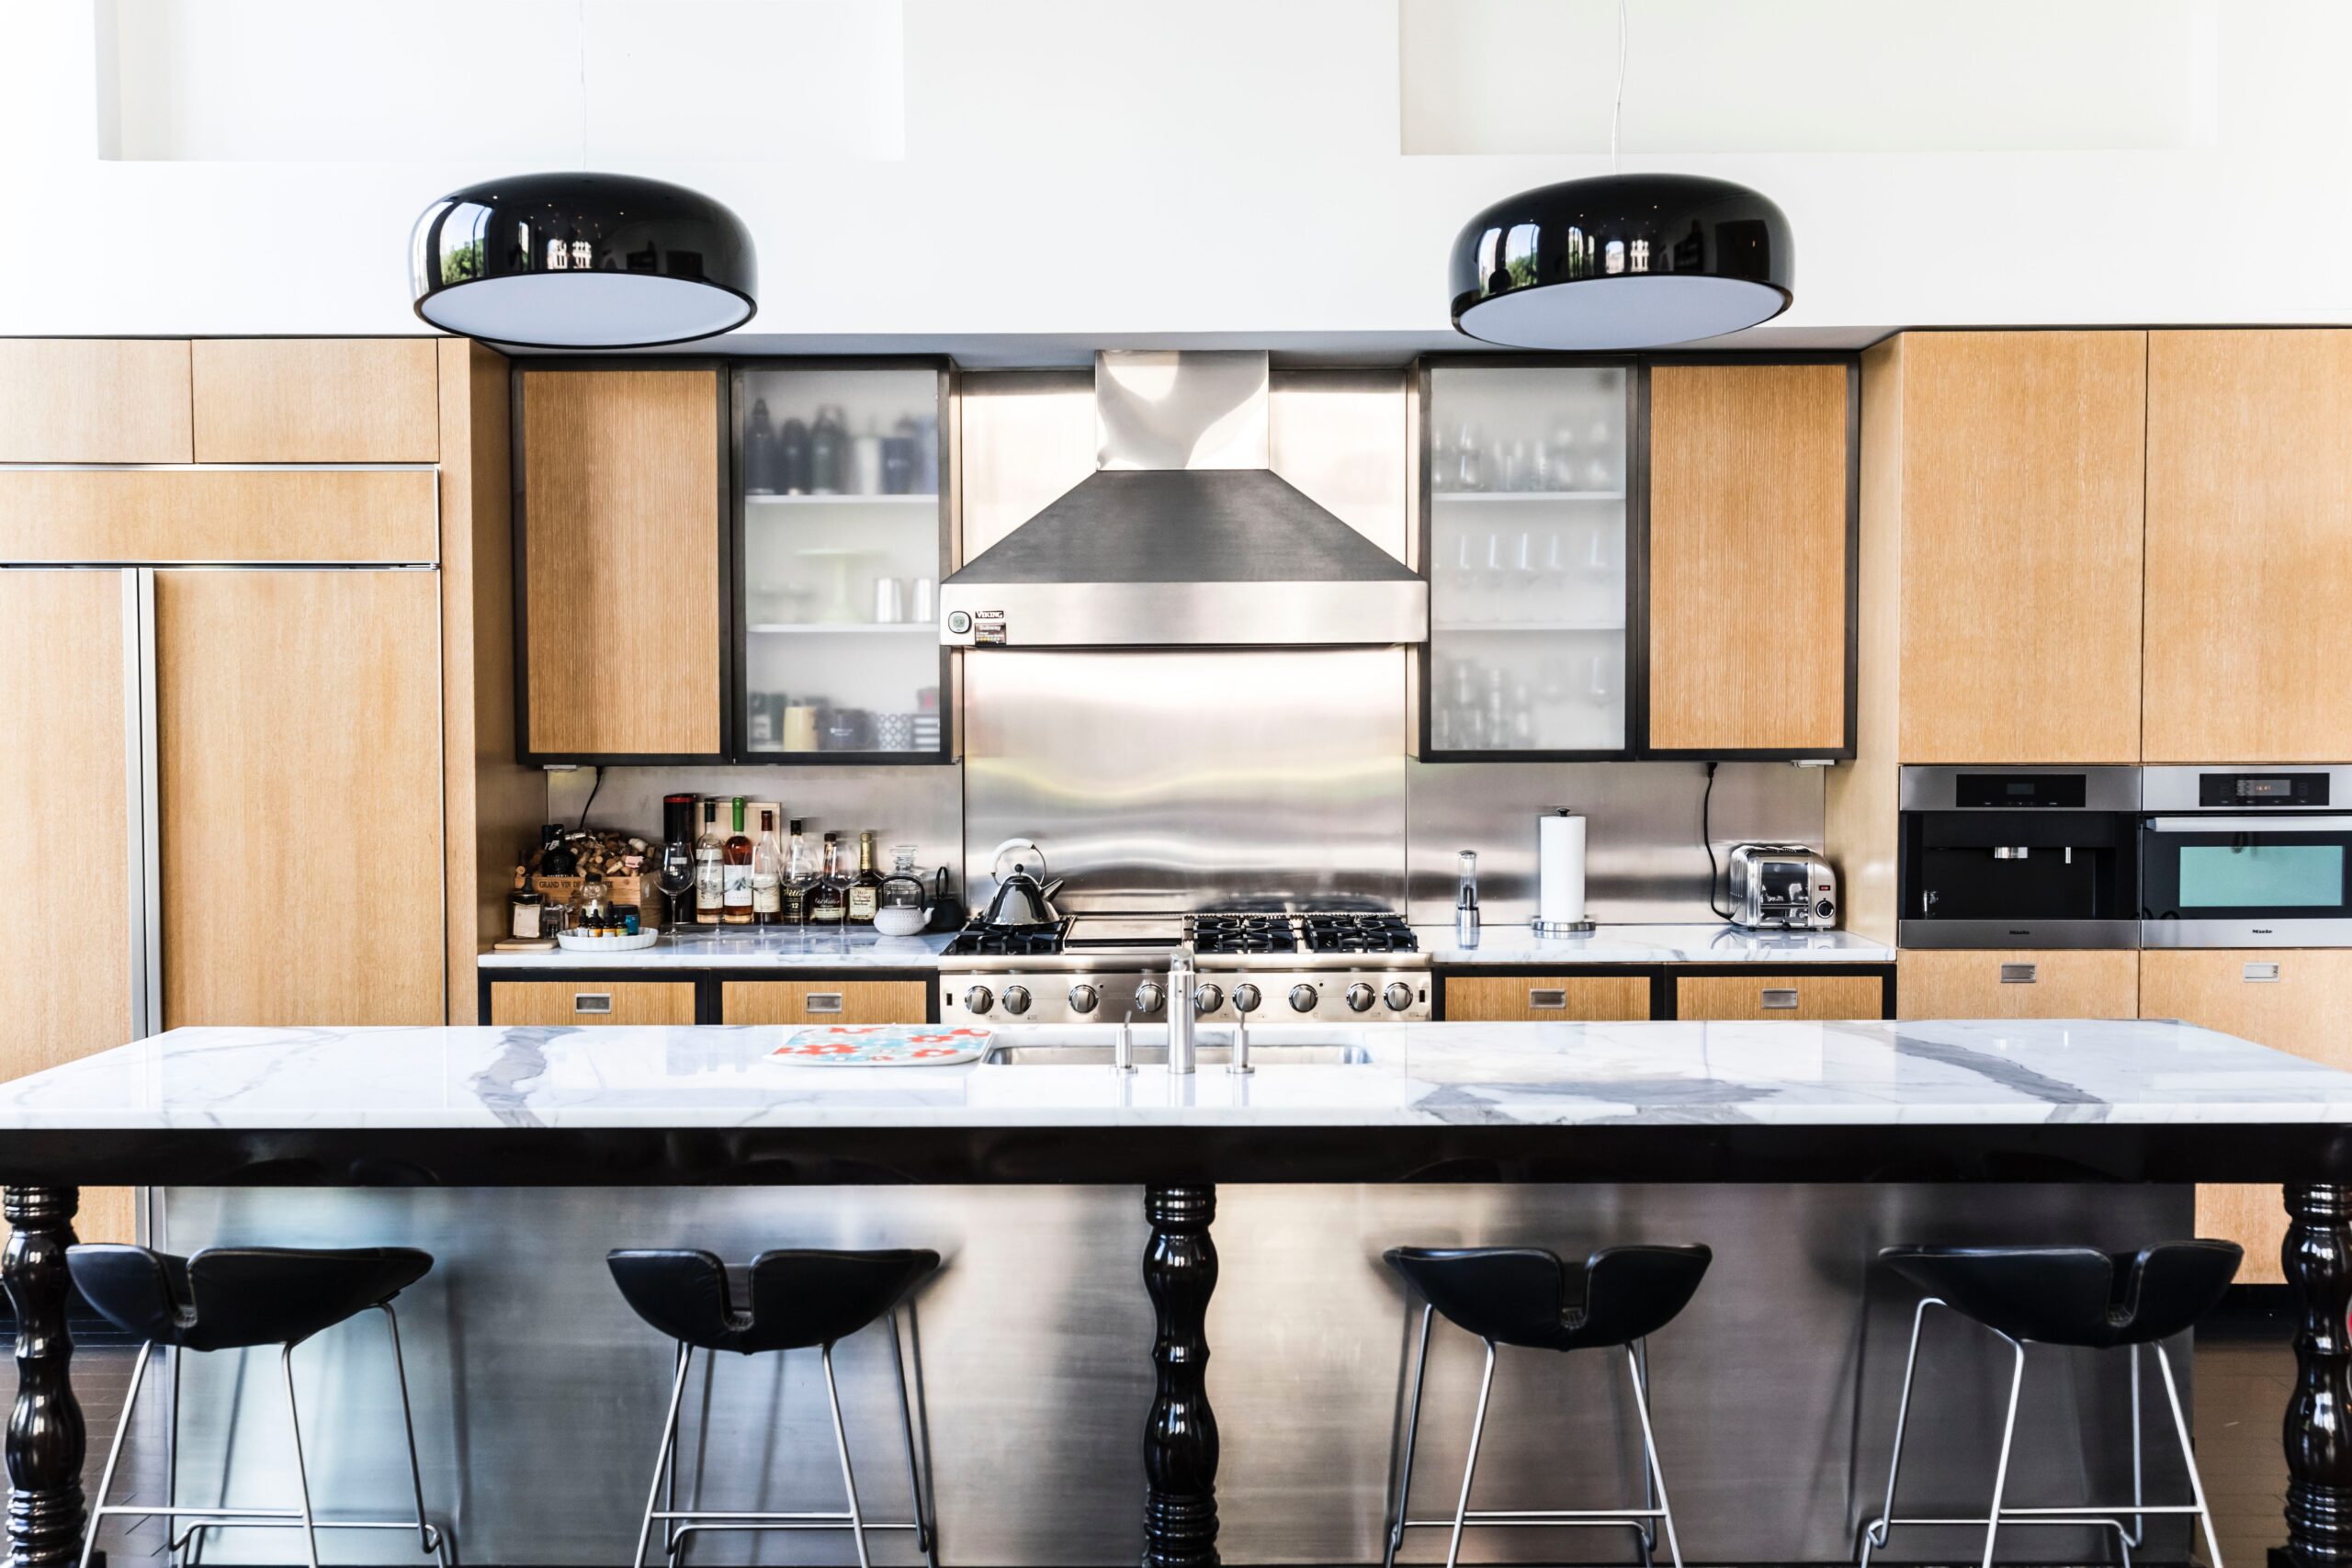 Can't decide between a farmhouse or a modern vibe? Why not try both. A black and wood kitchen countertop pairing works perfect for those wanting two different kitchen aesthetics. Pictured: Black countertops with wood cabinets.